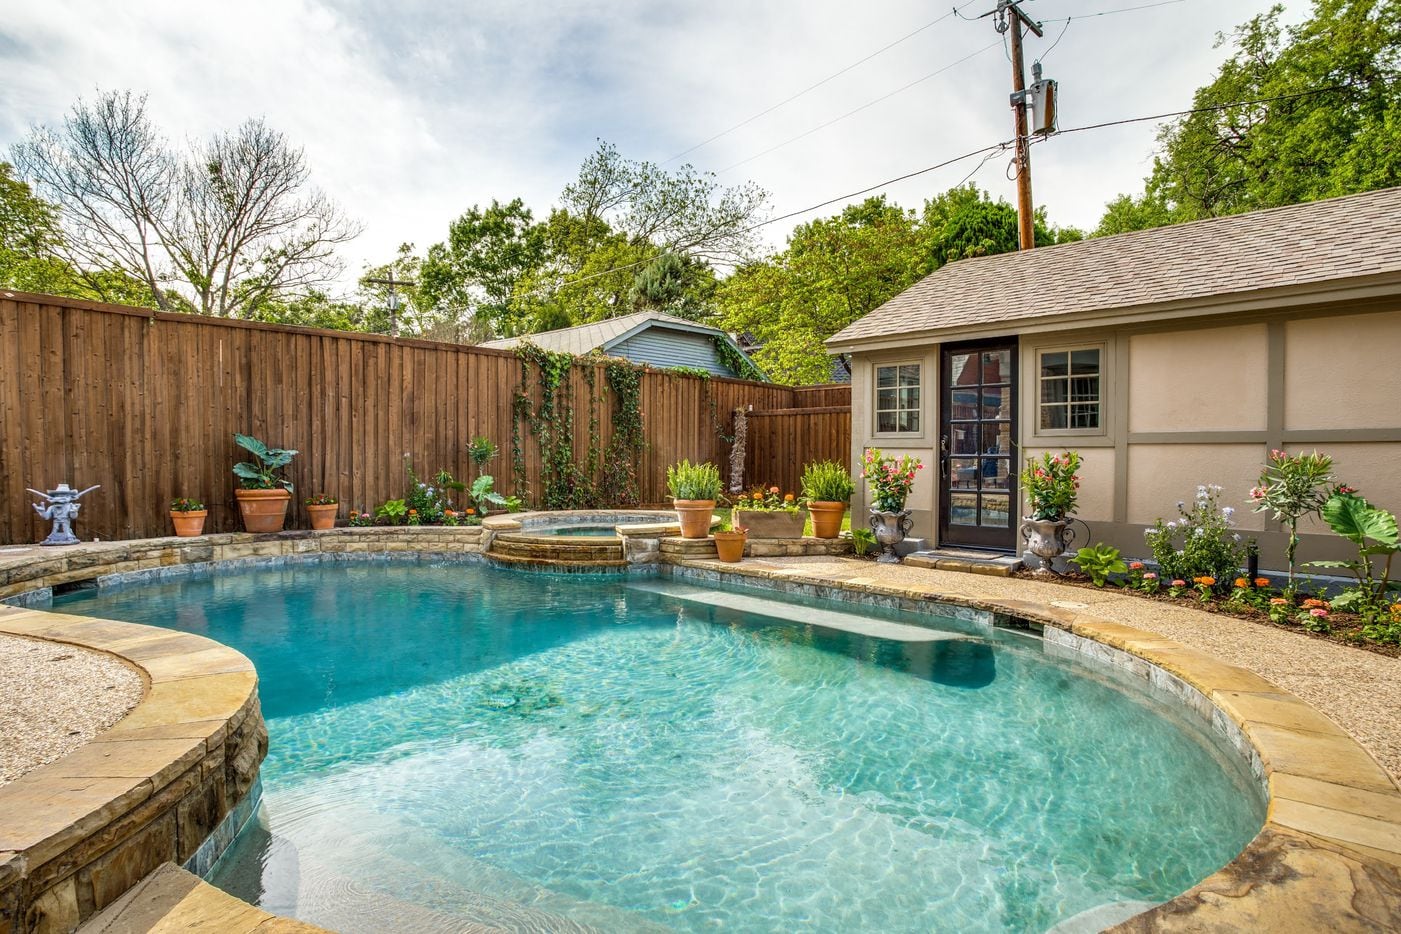 The pool and back patio area at 6521 Lakeshore Drive in Dallas.